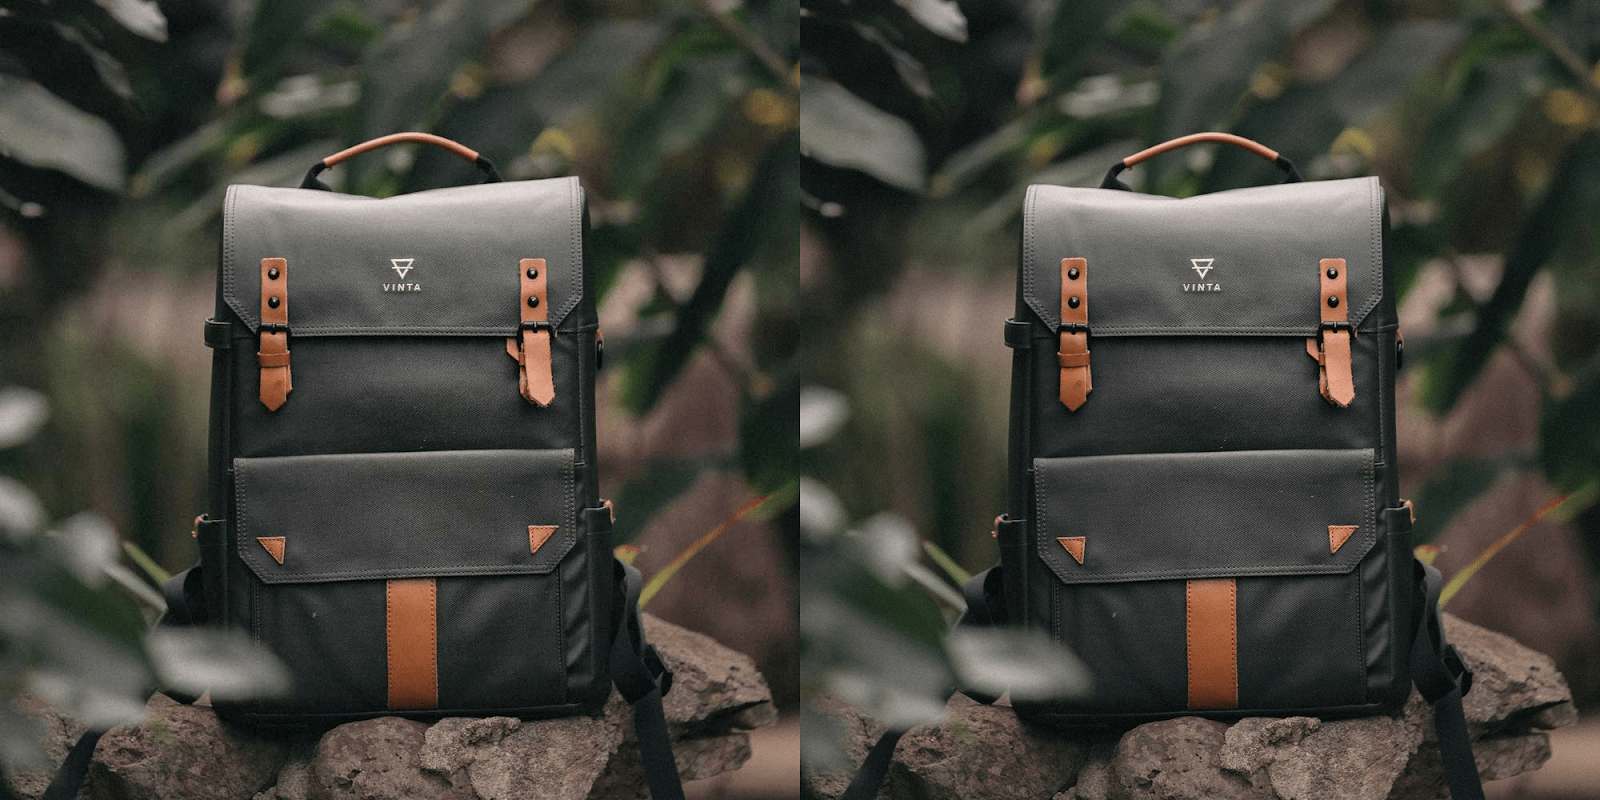 Two different quality images of a backpack look nearly identical.